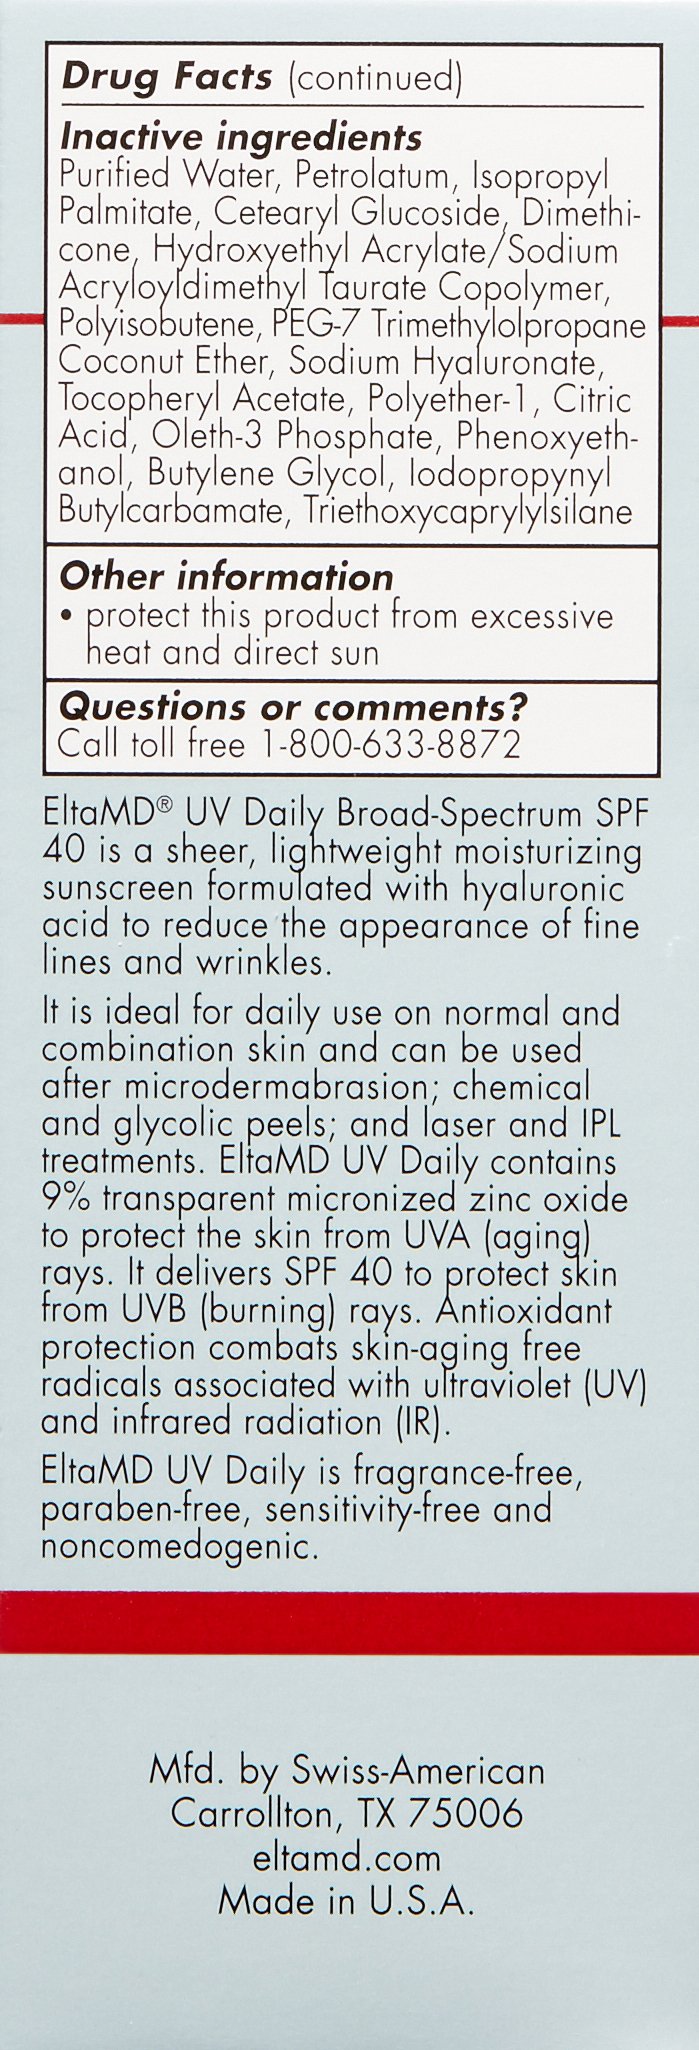 [Australia] - EltaMD UV Daily Face Sunscreen Moisturizer with Hyaluronic Acid, Broad Spectrum SPF 40, Non greasy, Sheer Zinc Oxide Lotion, Mineral-Based UVA, UVB Sun Protection, 1.7 oz Facial Sunscreen 